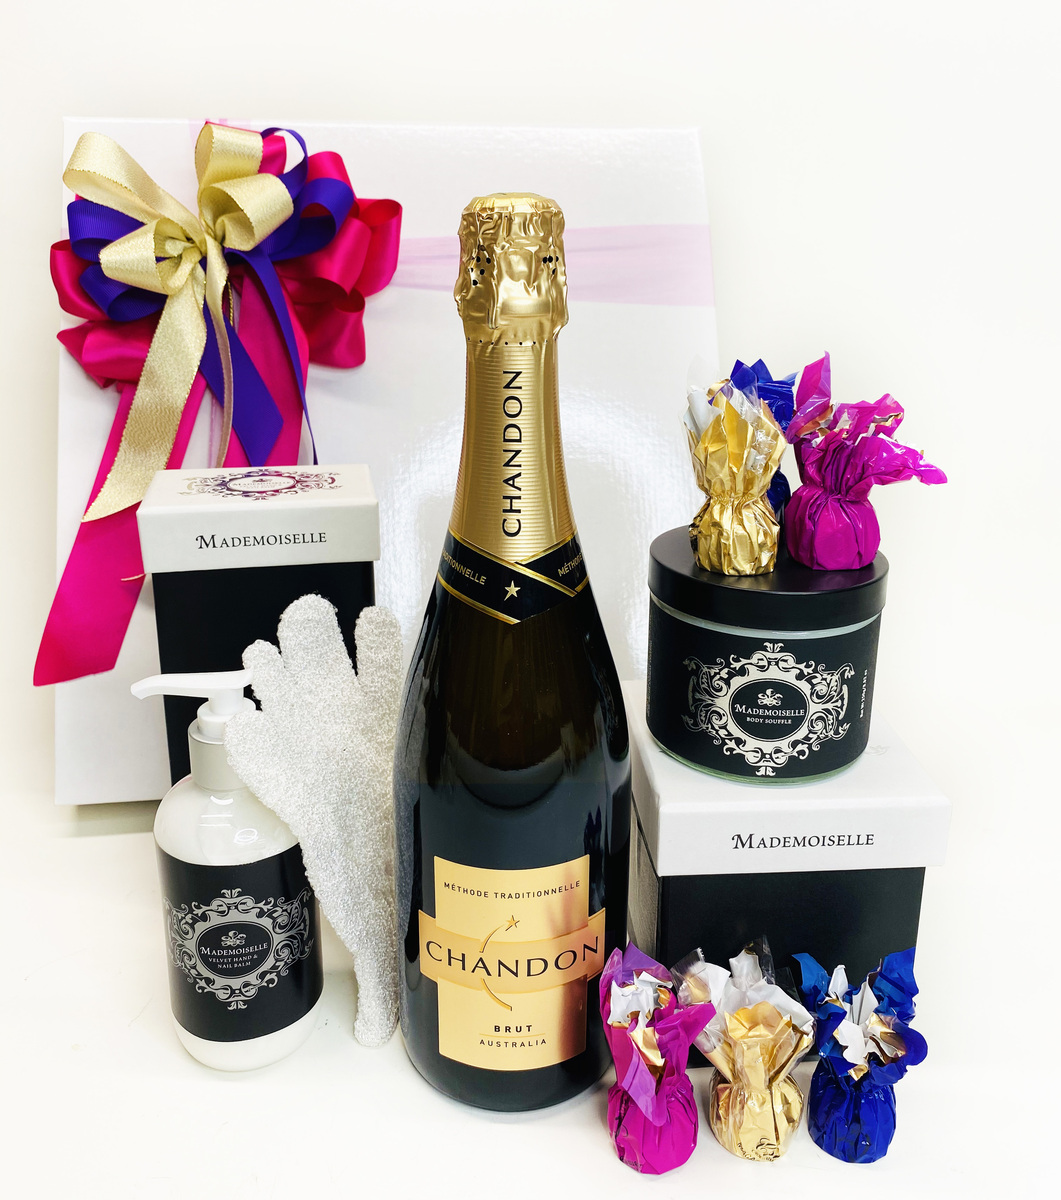 So Classy Pamper Hamper | Gourmet Hampers |  Australia Delivery product photo